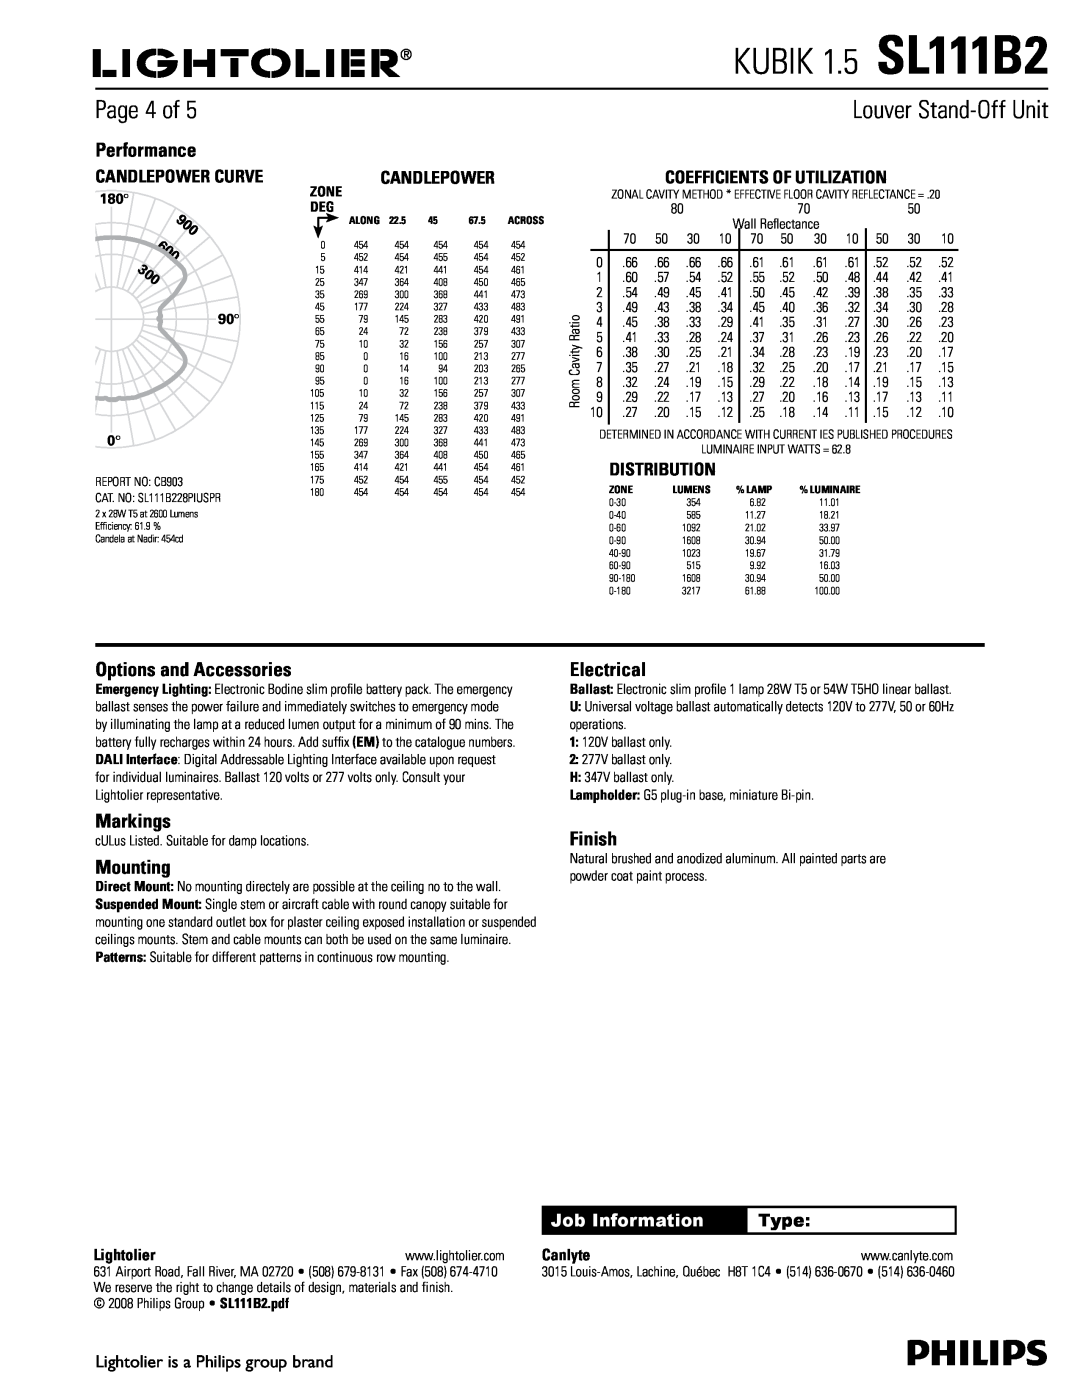 Lightolier KUBIK 1.5 SL111B2, Page 4 of, Performance, Options and Accessories, Markings, Mounting, Electrical, Finish 